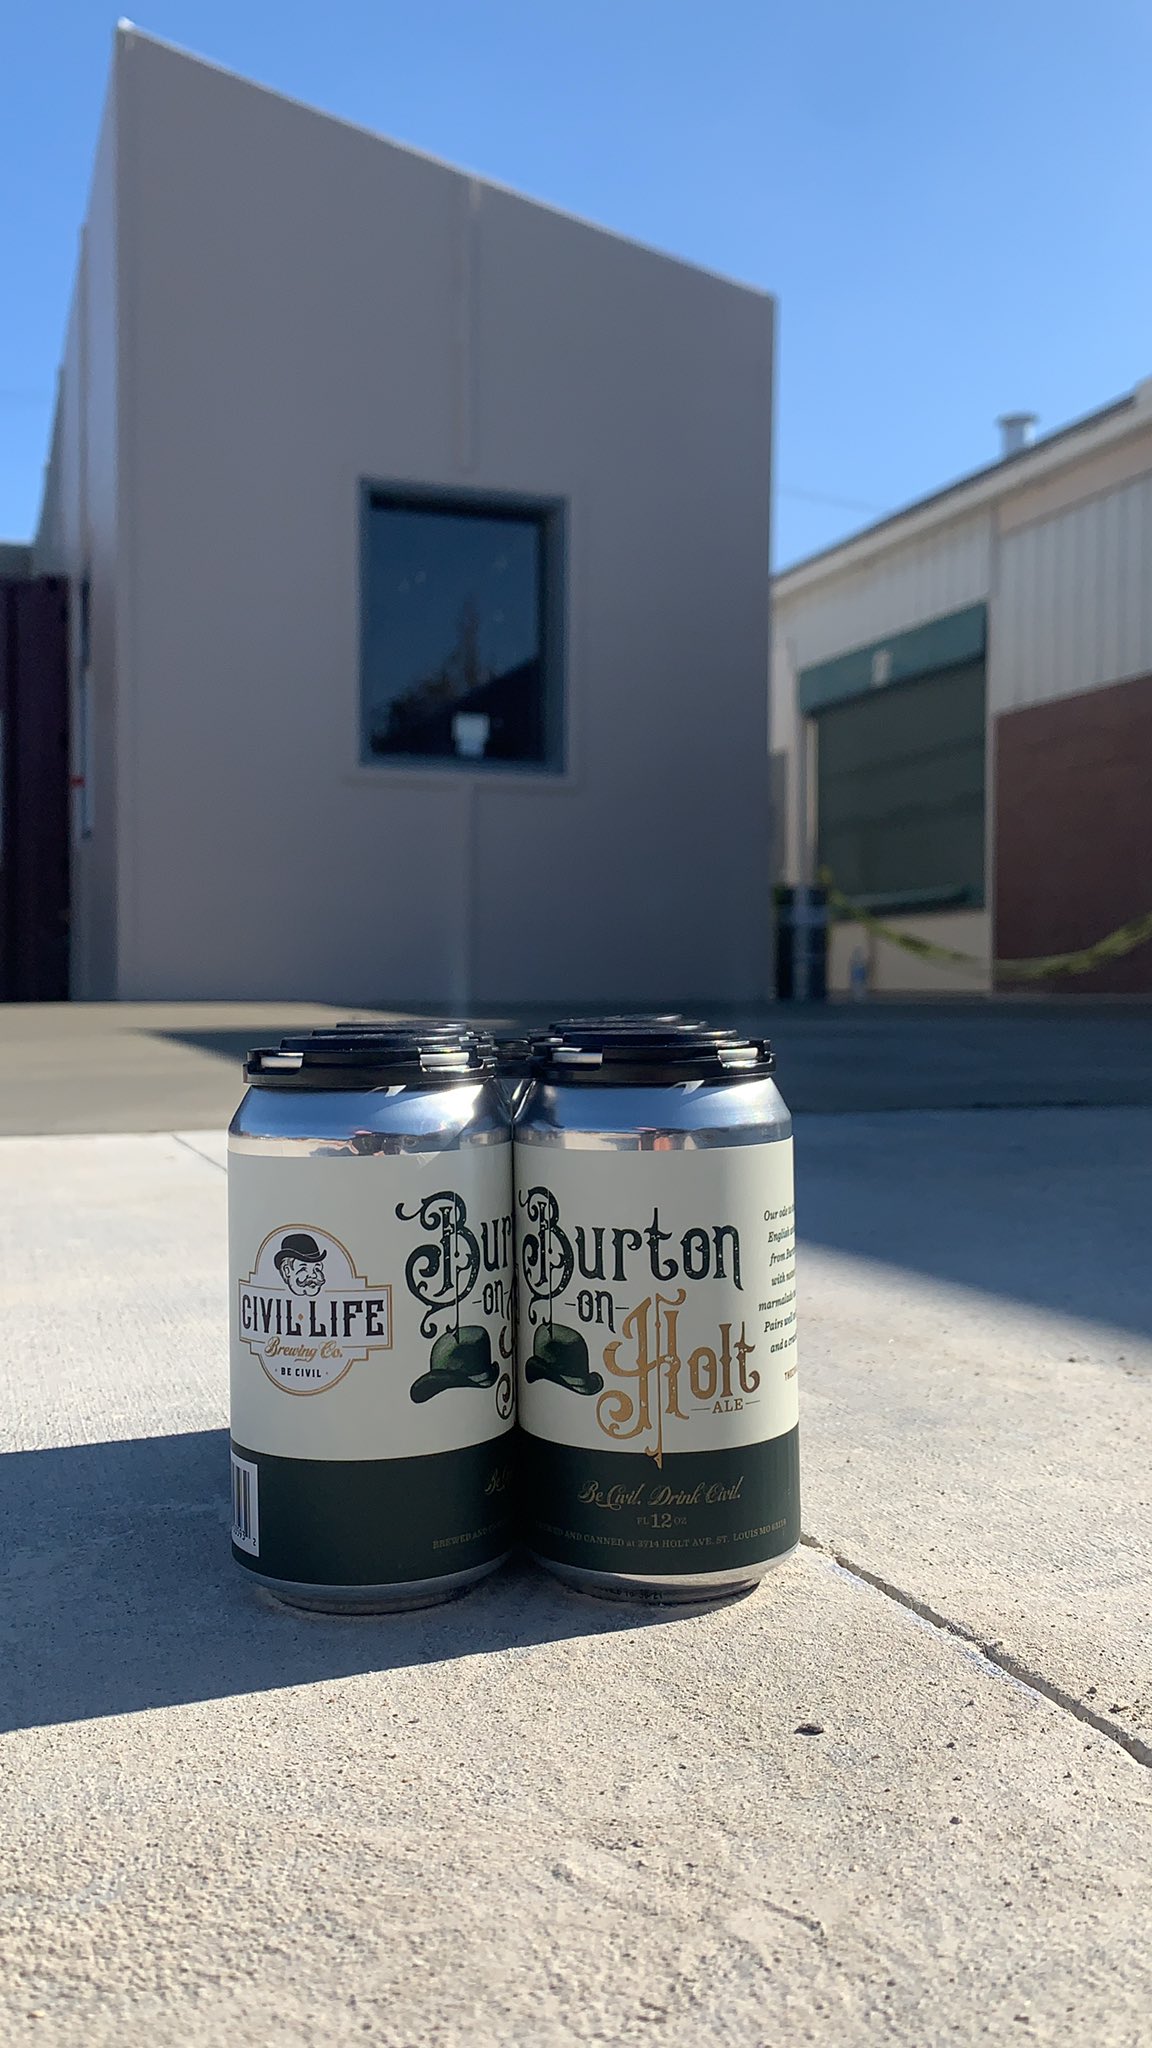 Verpersoonlijking micro microfoon Be Civil on Twitter: "Burton on Holt is now available around town and in  our online store at https://t.co/jJhiQHPAkh! https://t.co/TX2rvBG4KS" /  Twitter